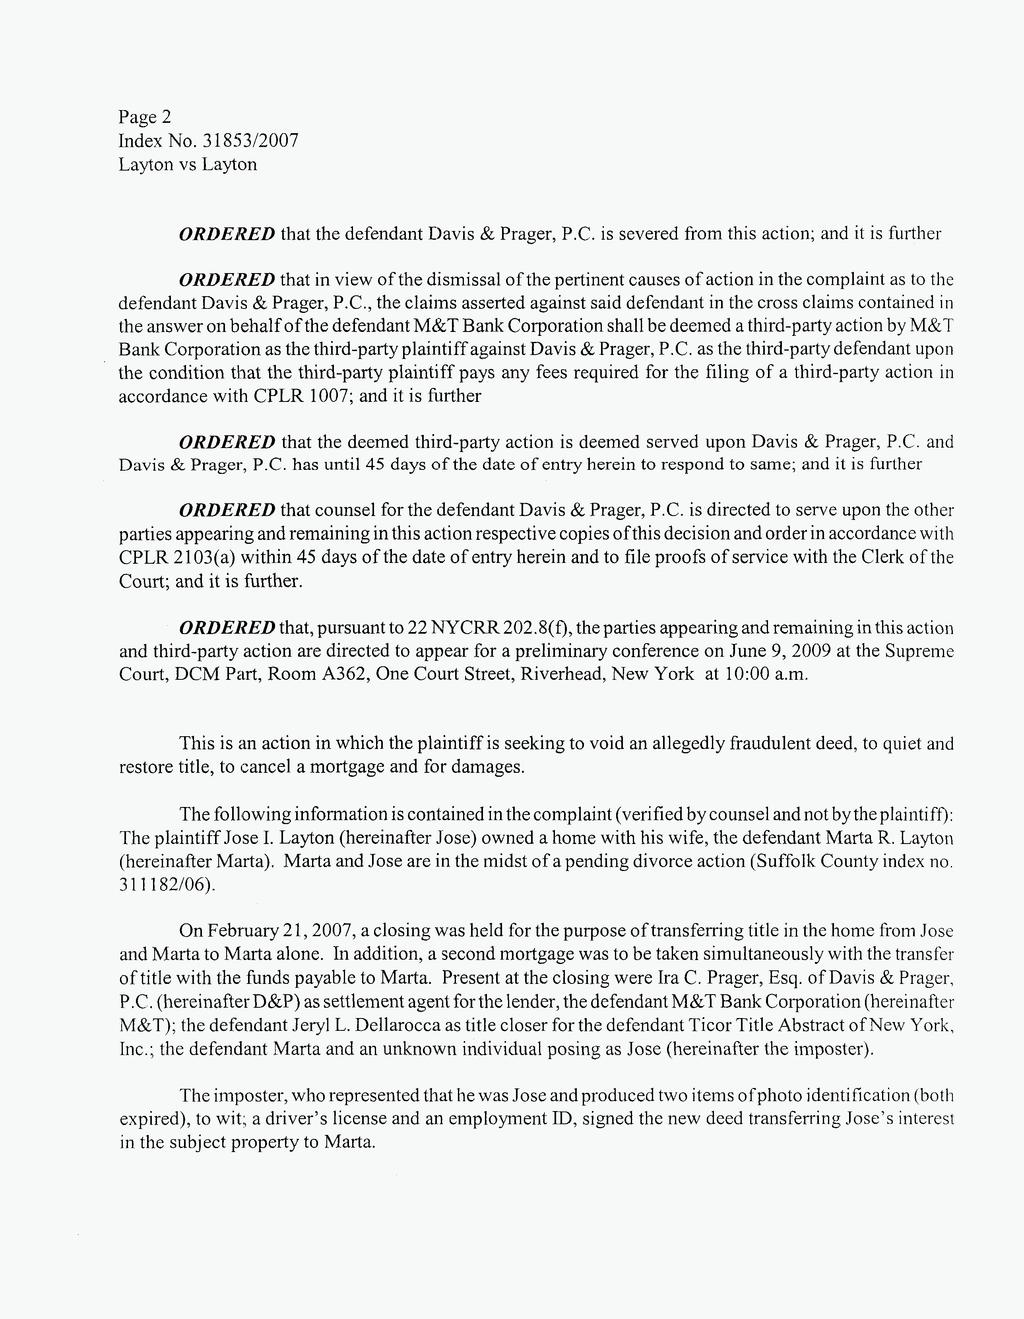 [* 2] Page 2 Index No. 3 1853/2007 ORDERED that the defendant Jlavis & Prager, P.C.